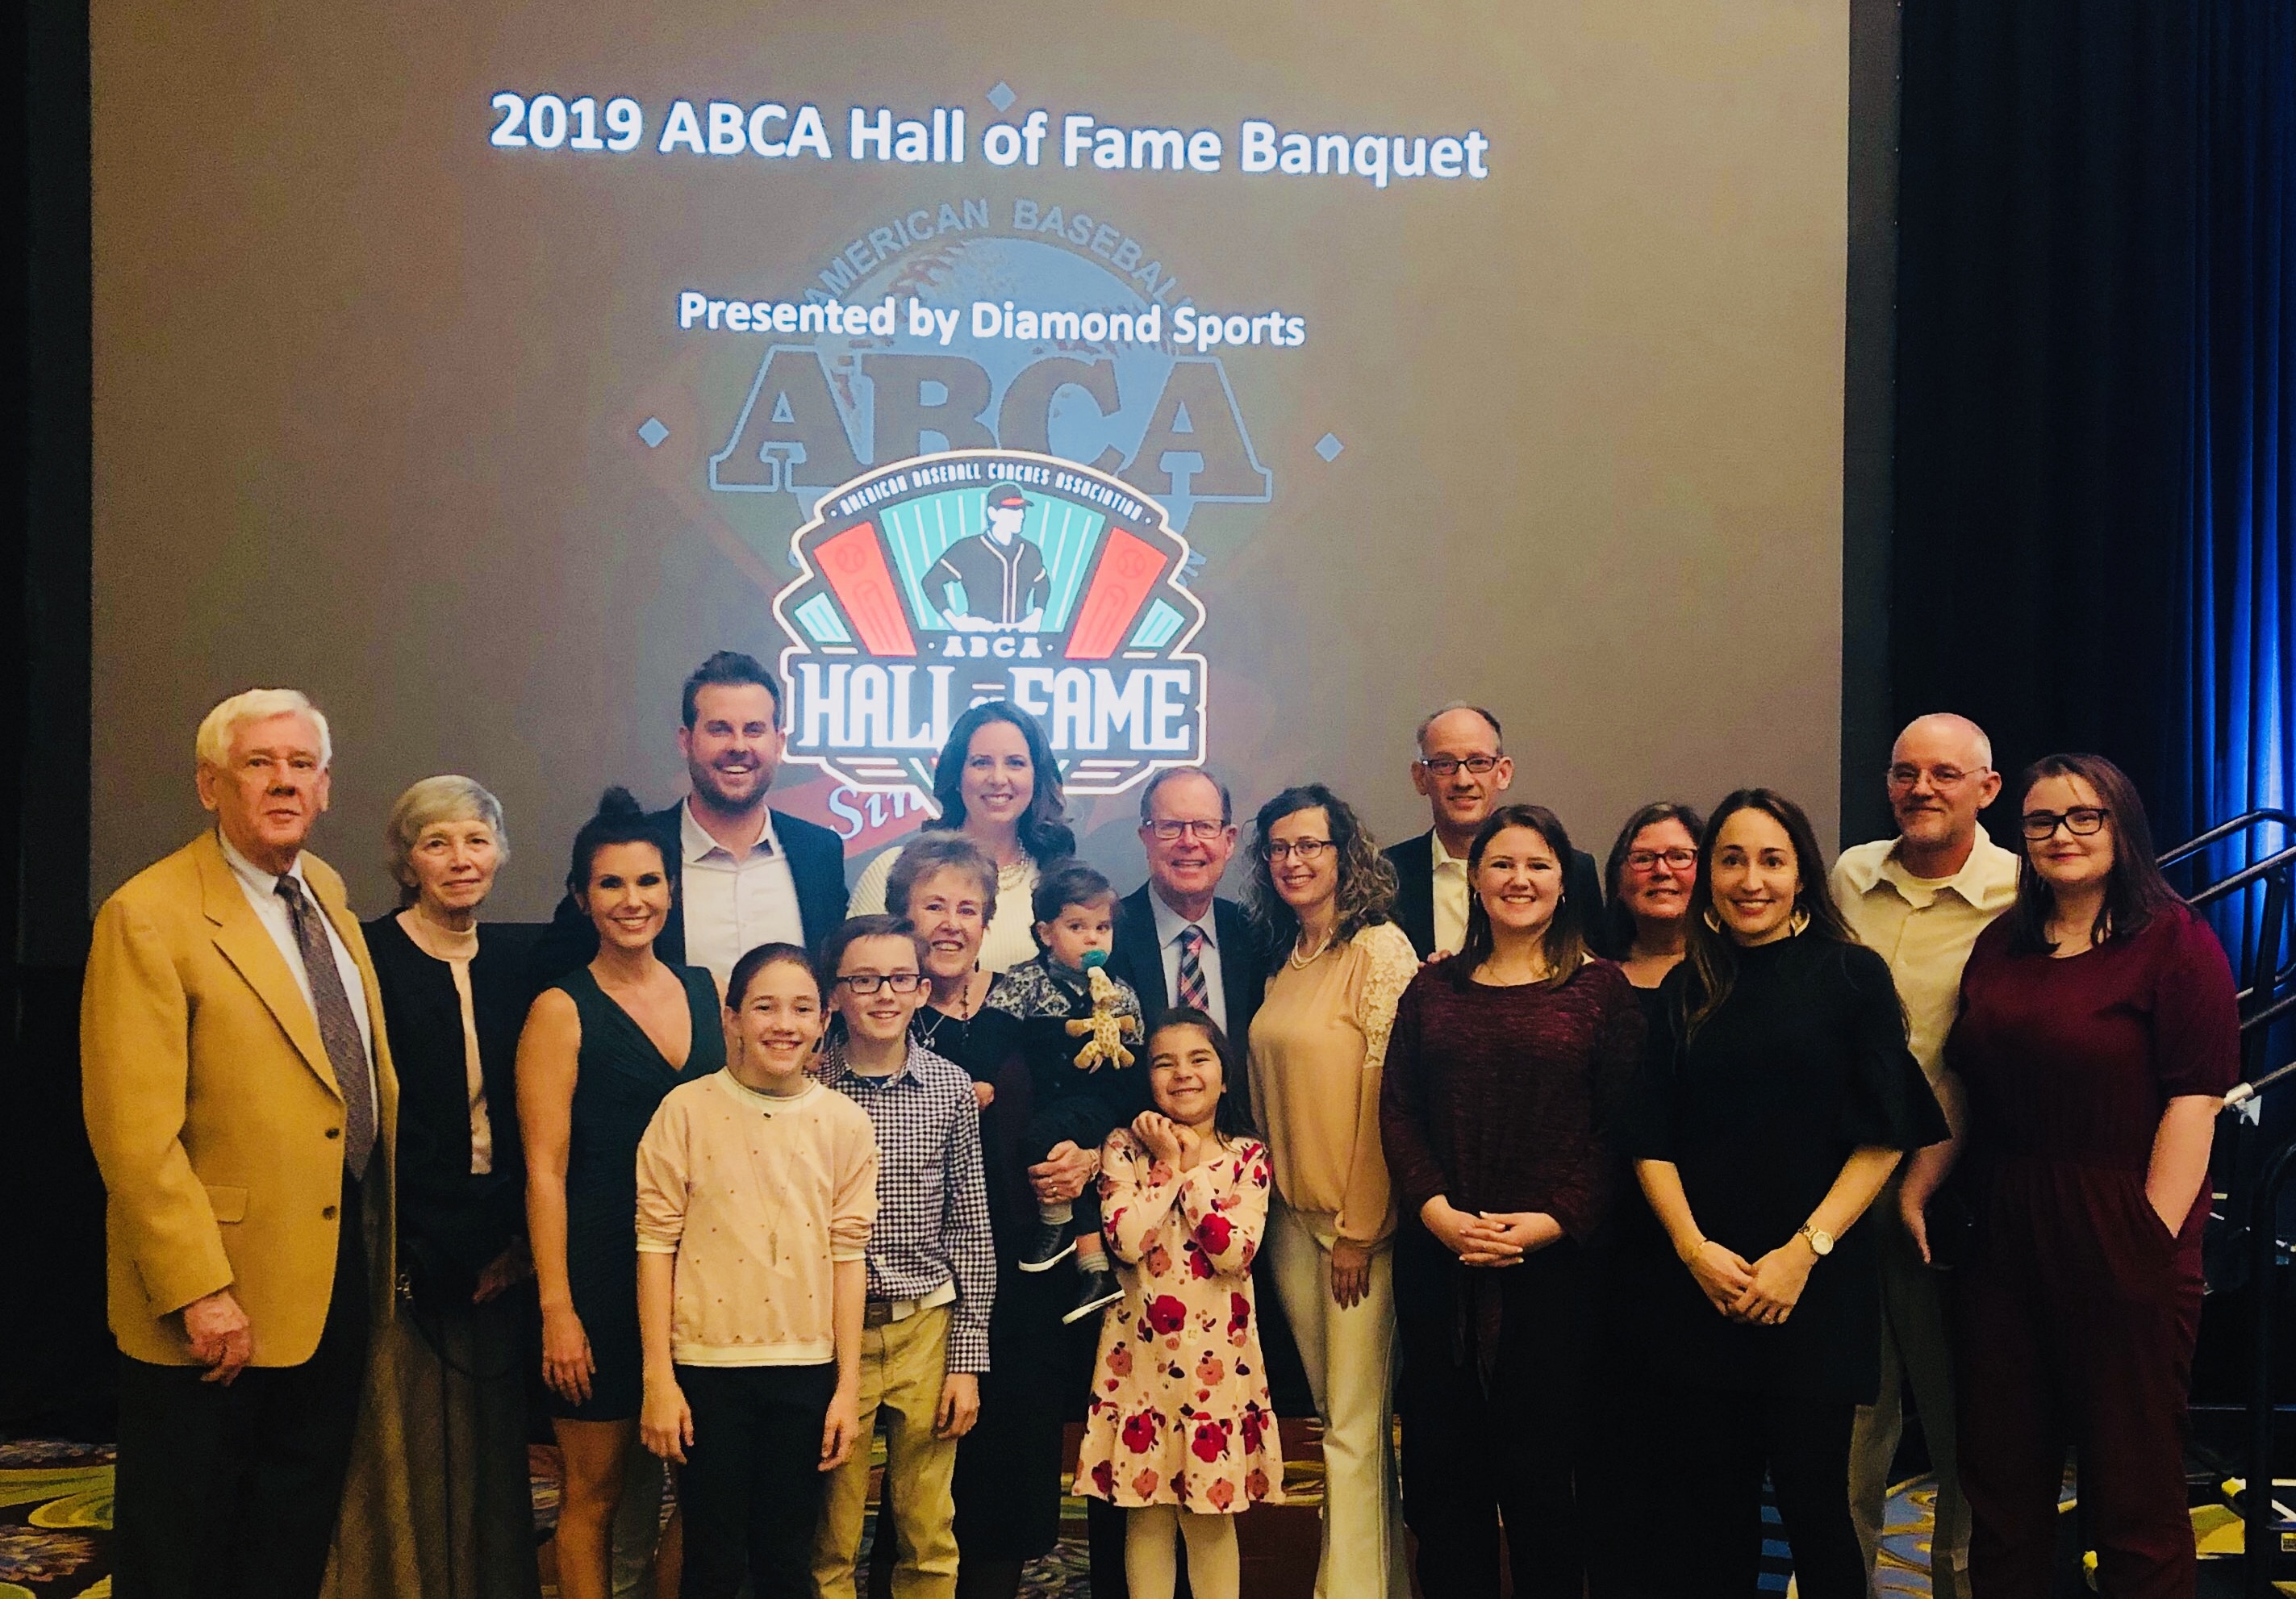 Coach Pat Doyle, surrounded by family and friends at his Hall of Fame induction. Doyle coached baseball at San Joaquin Delta College from 1977 through 2000.